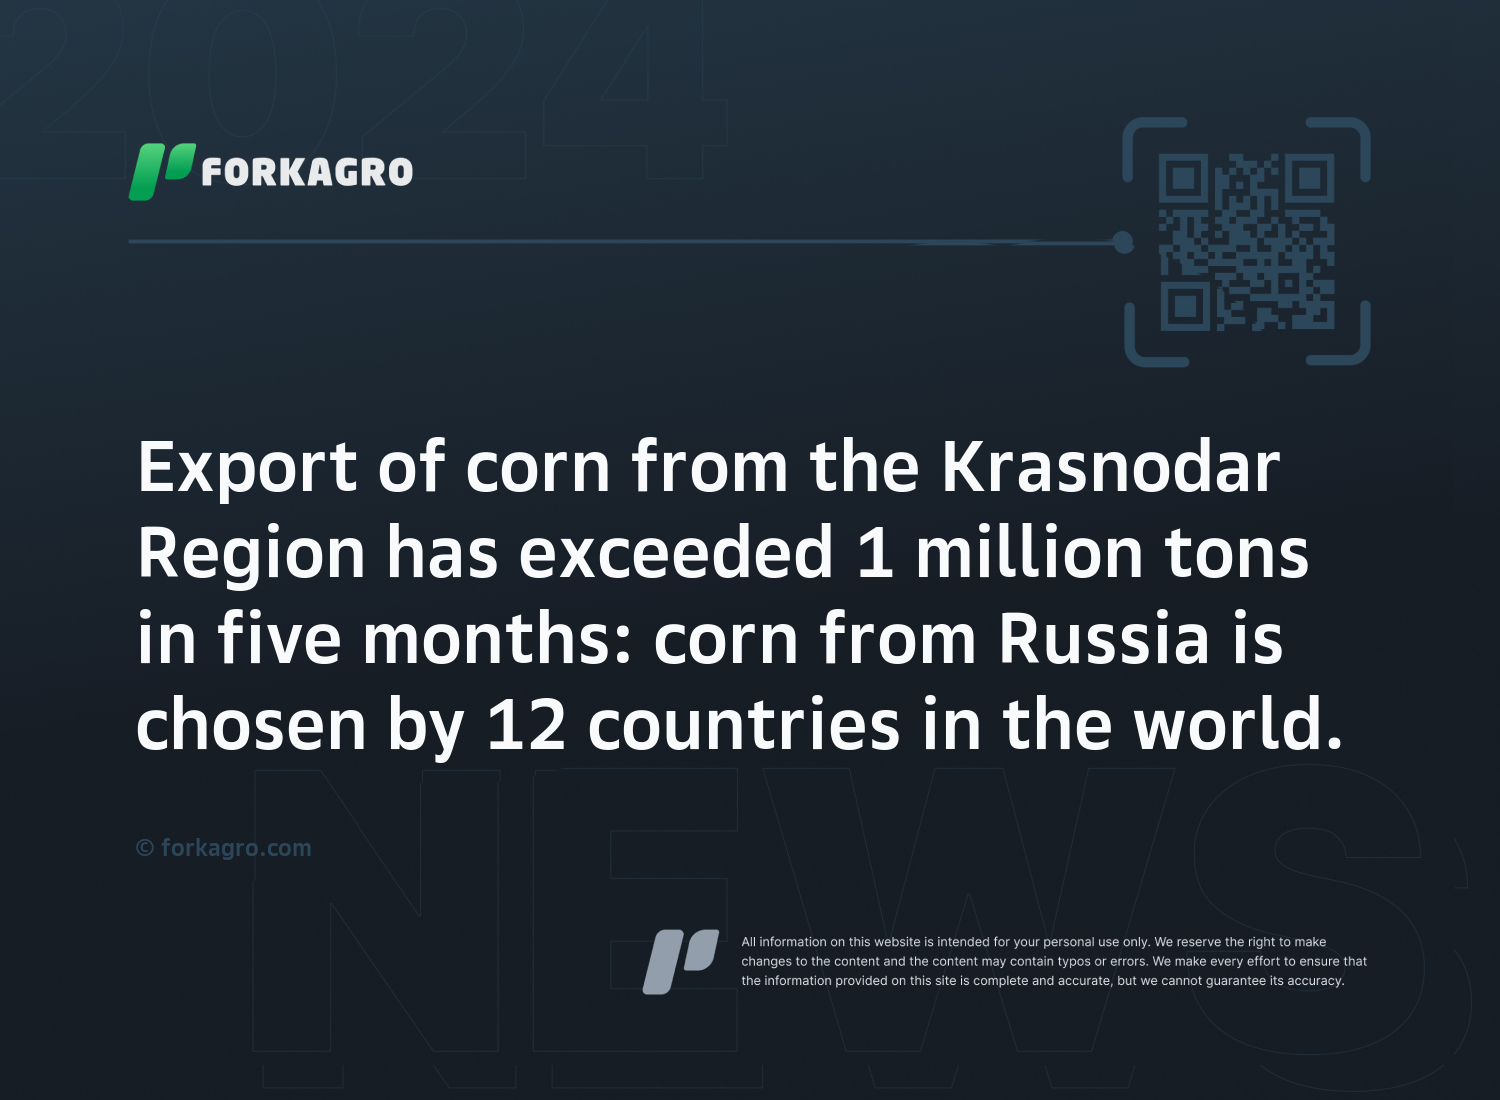 Export of corn from the Krasnodar Region has exceeded 1 million tons in five months: corn from Russia is chosen by 12 countries in the world.